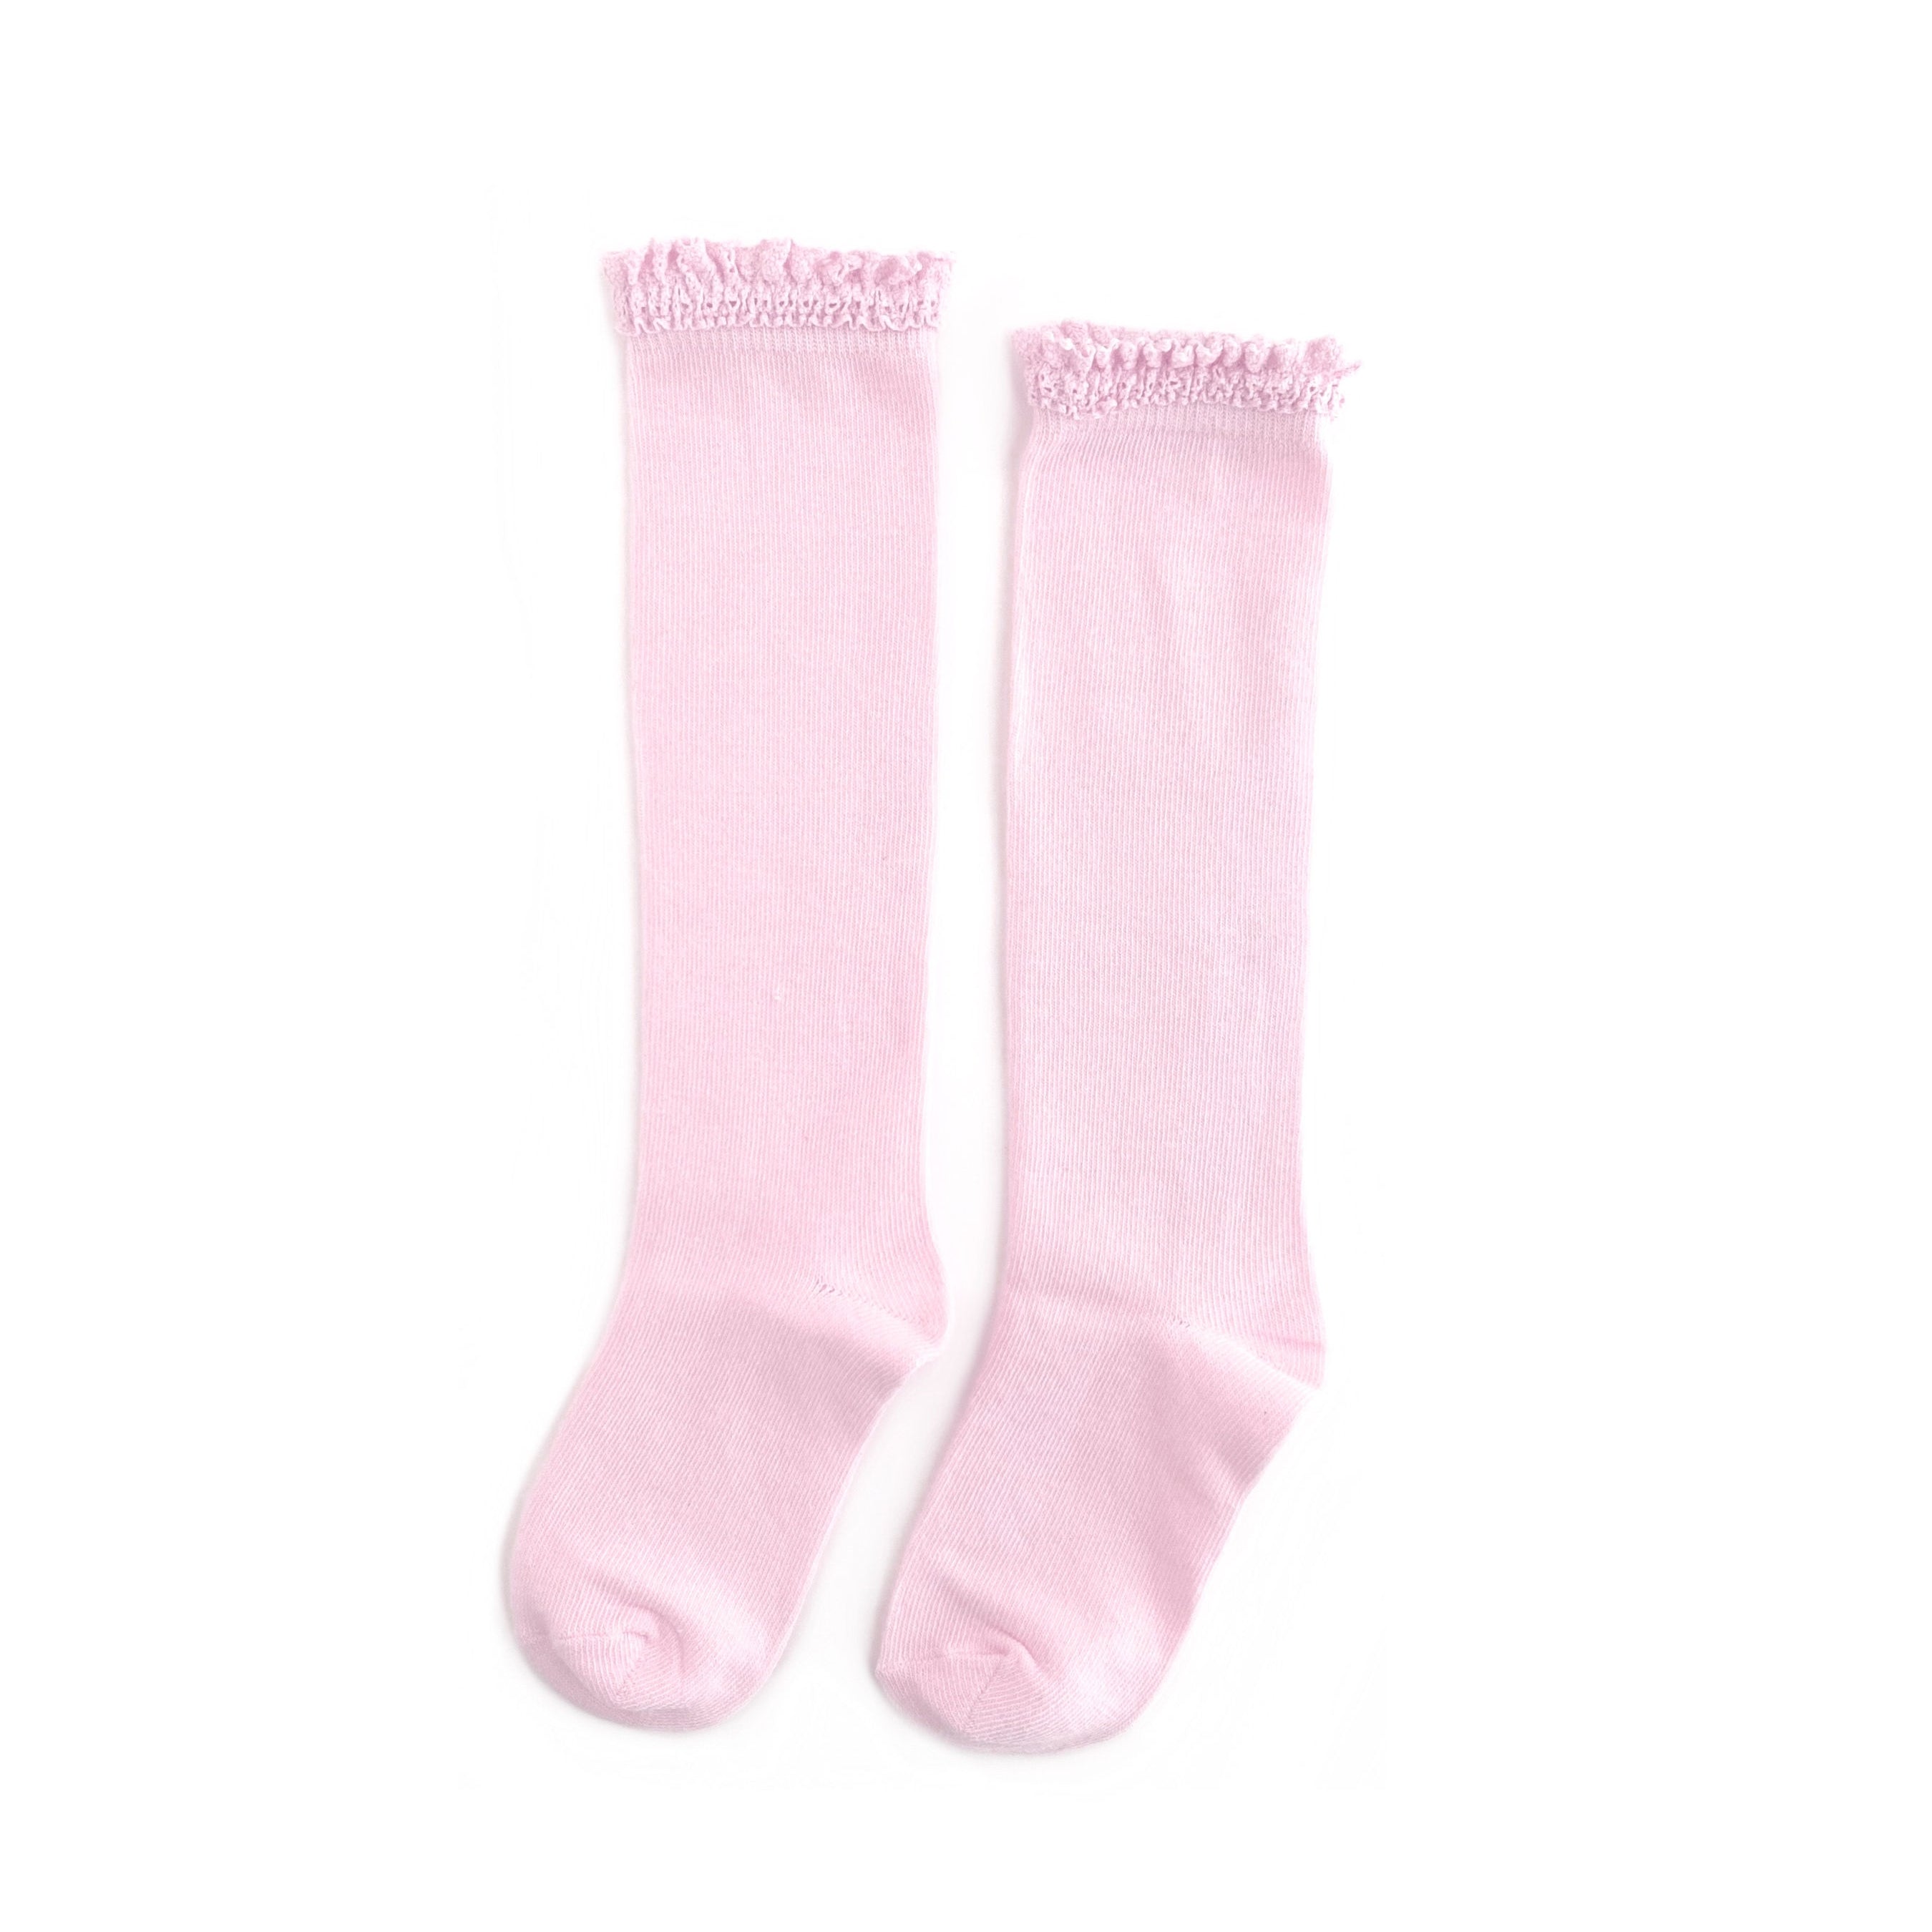 Cotton Candy Lace Top Knee High Socks  A Touch of Magnolia Boutique   